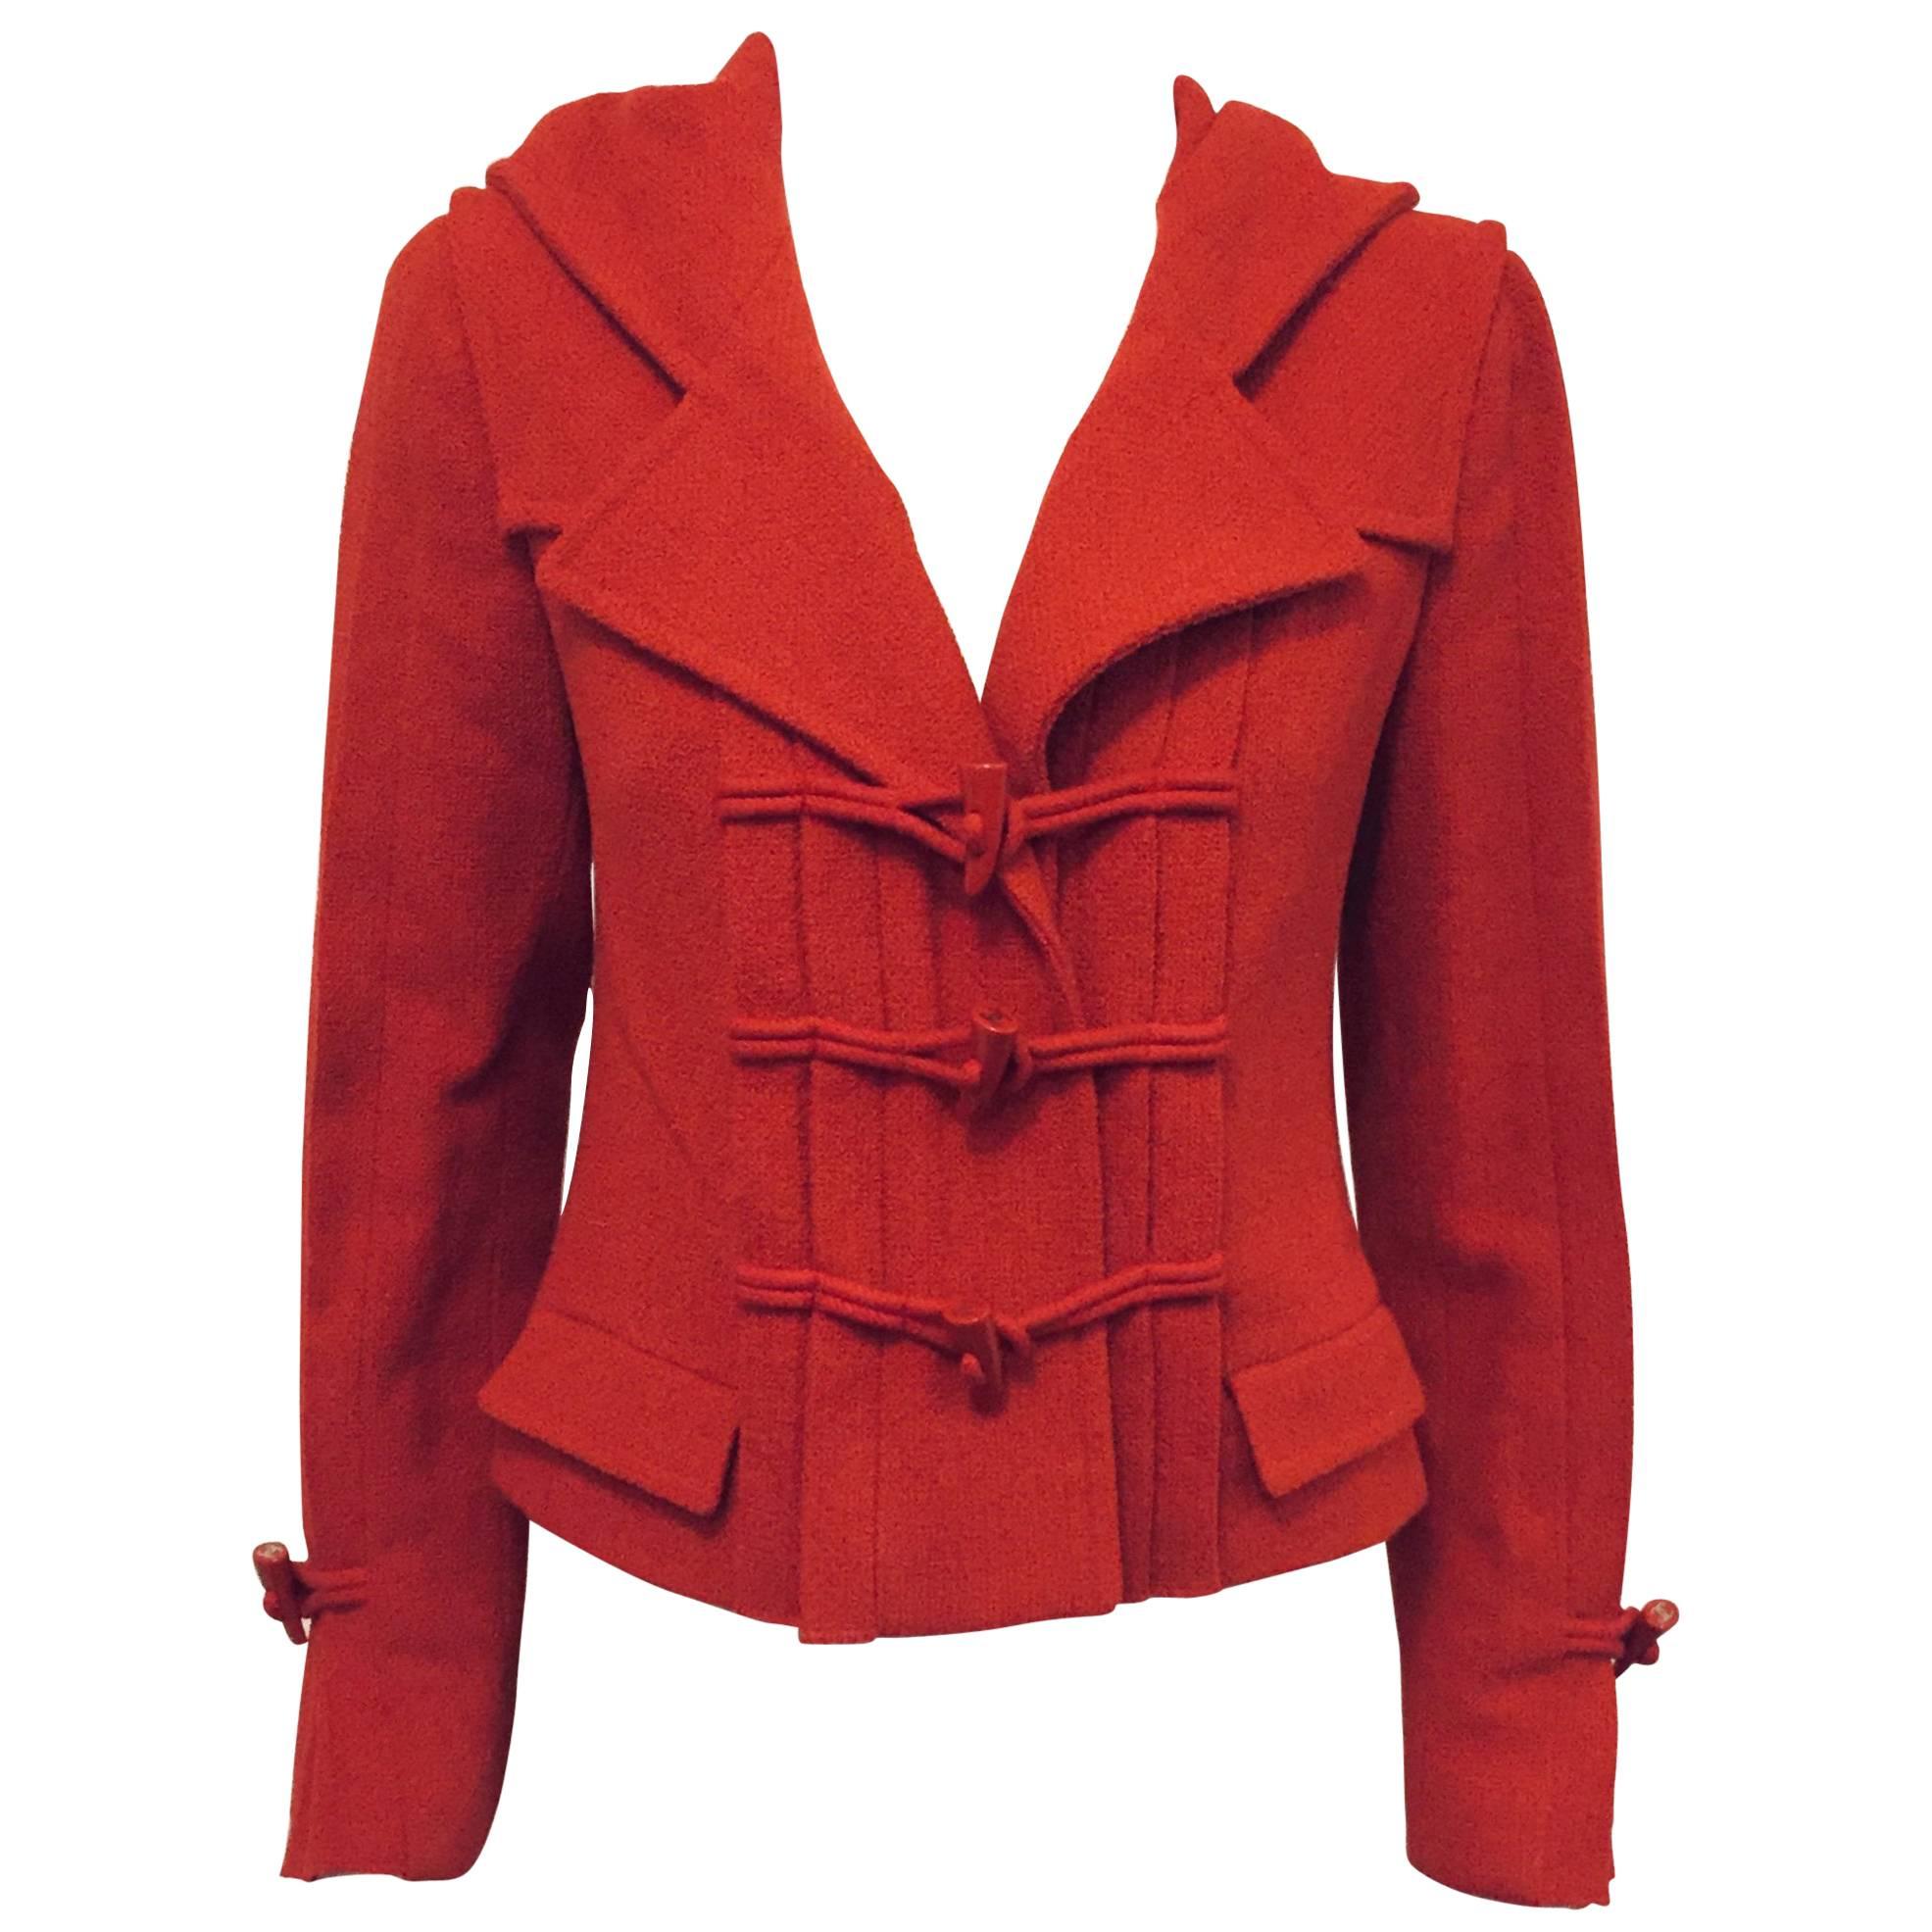  Cupid's Chanel Red Hooded Wool Jacket with Pleats Front, Back & Sleeves 